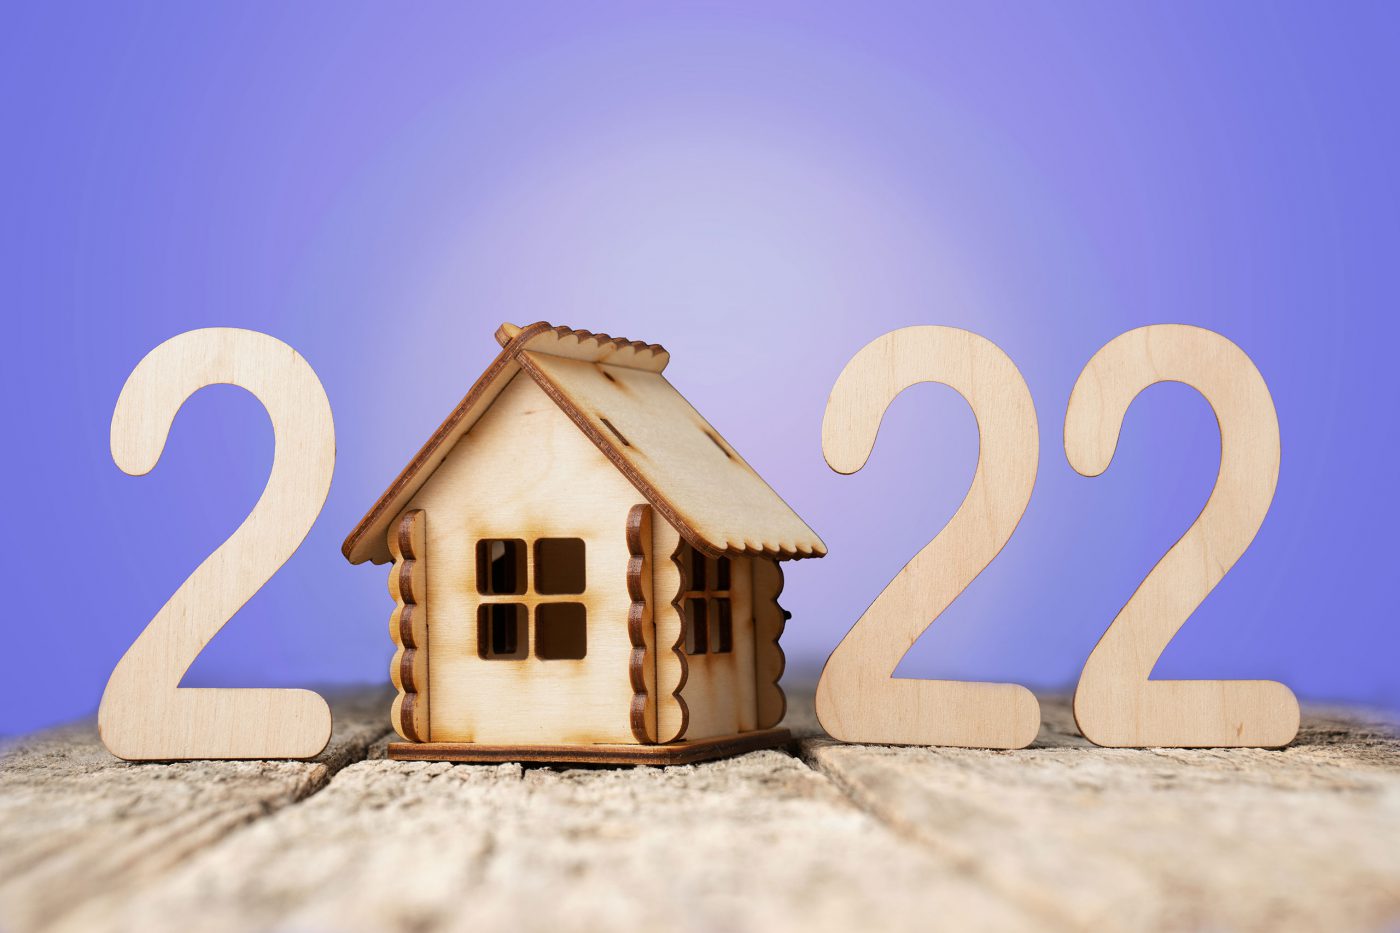 Should You Build or Buy a House in 2022